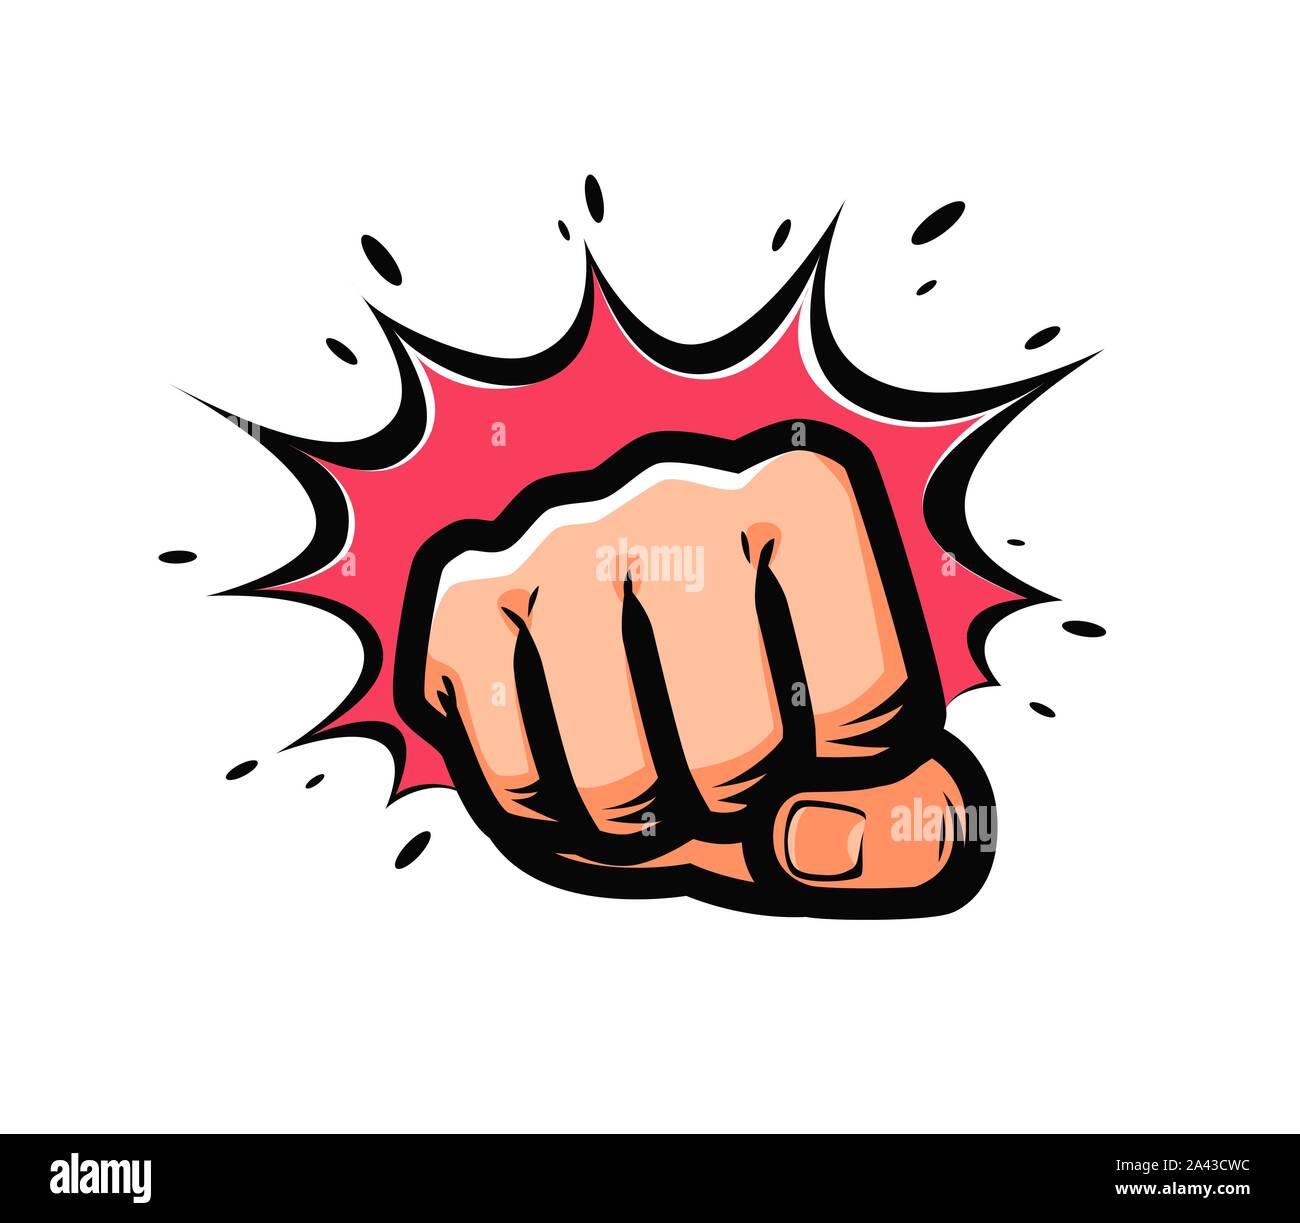 Fist punching in pop-art style. Vector illustration Stock Vector